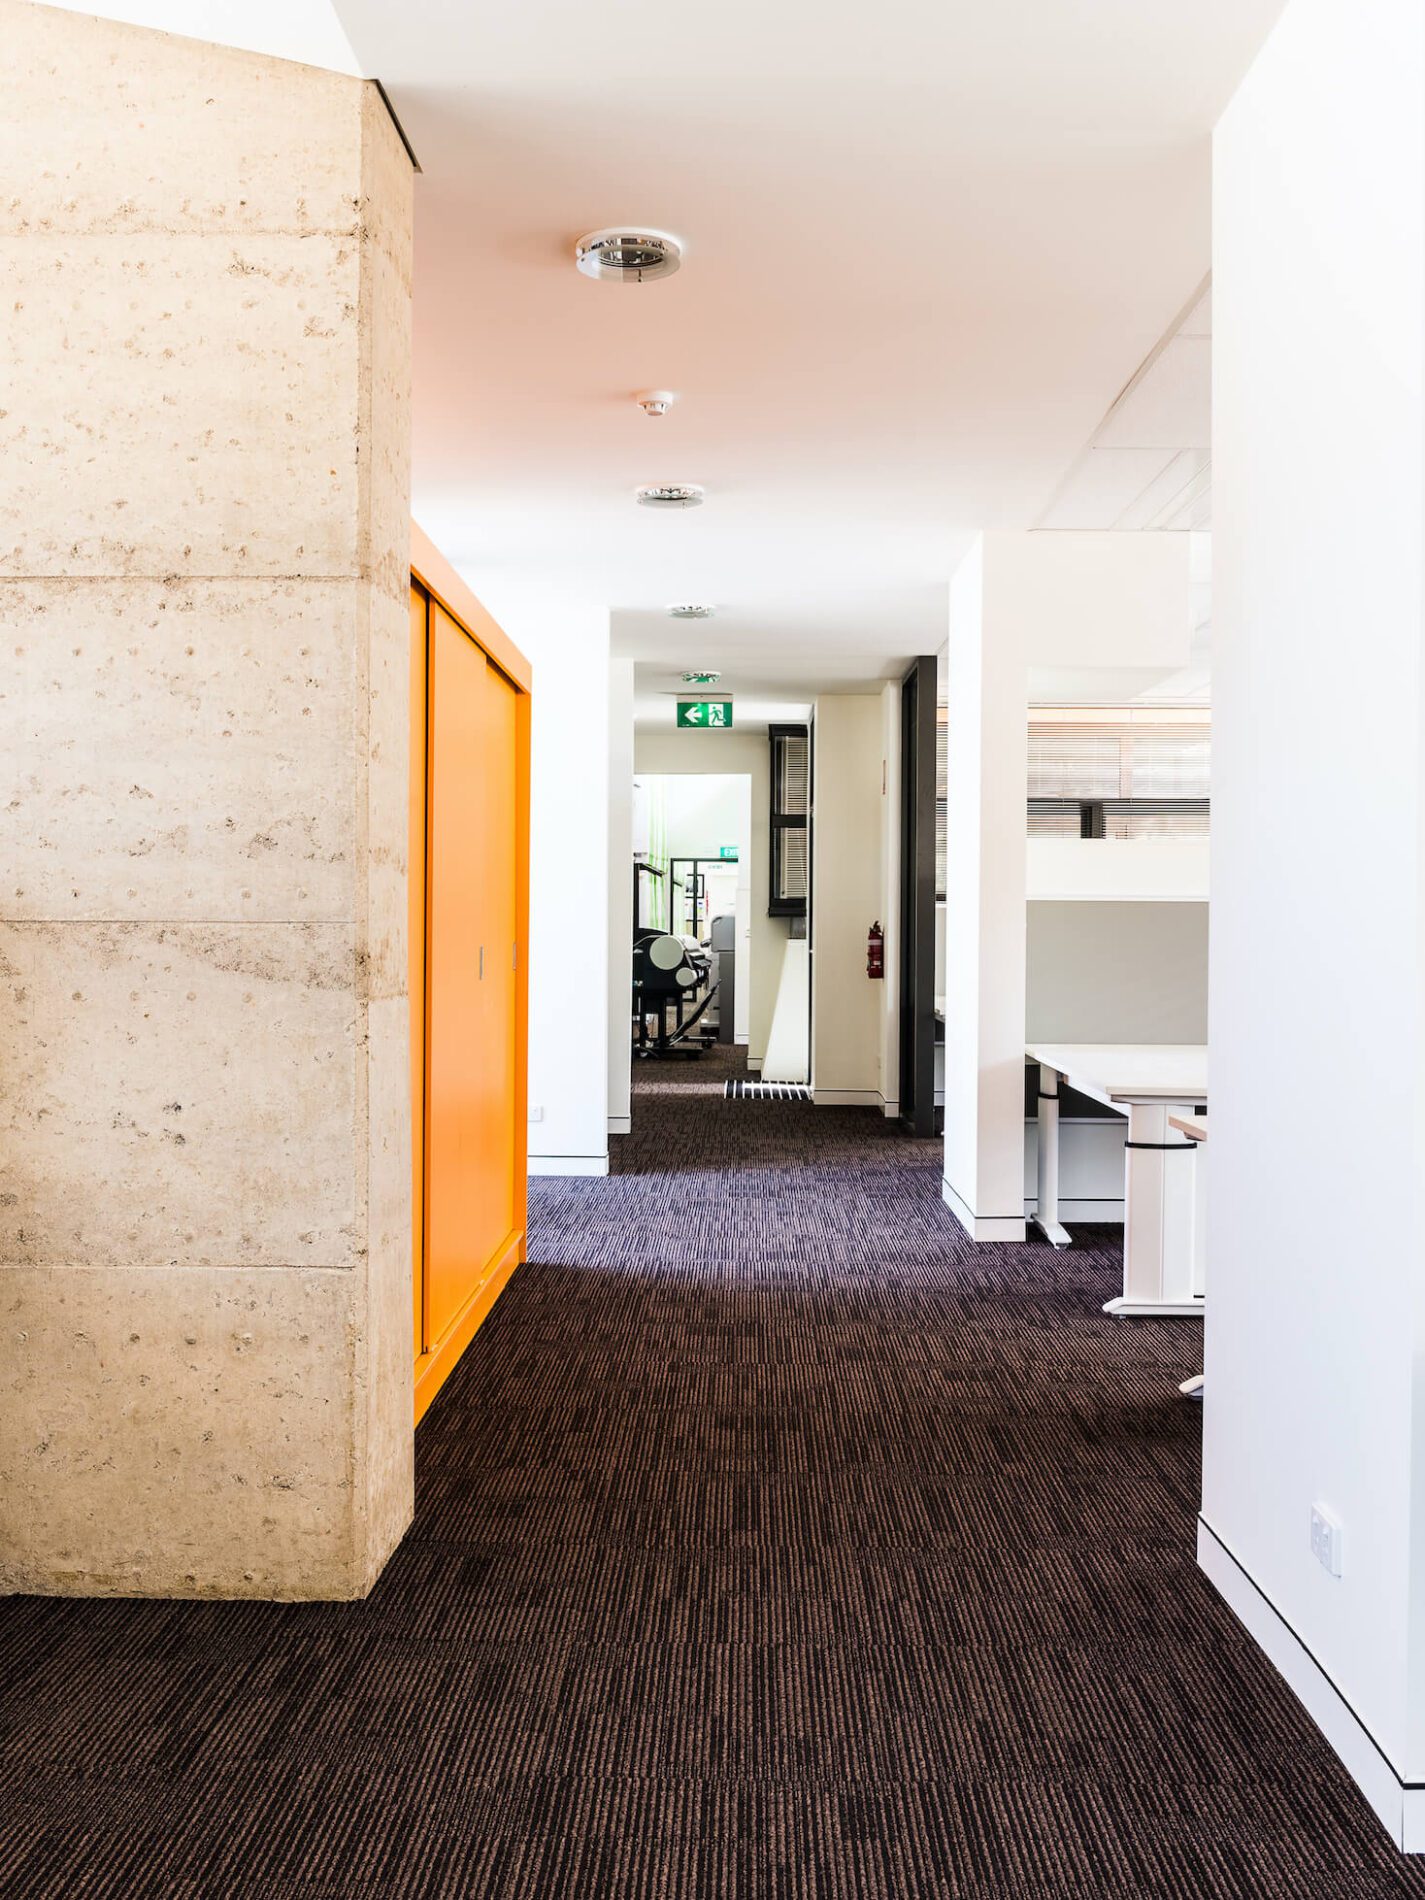 Interior shot of government office hallway with carpet and stone wall, orange cabinet